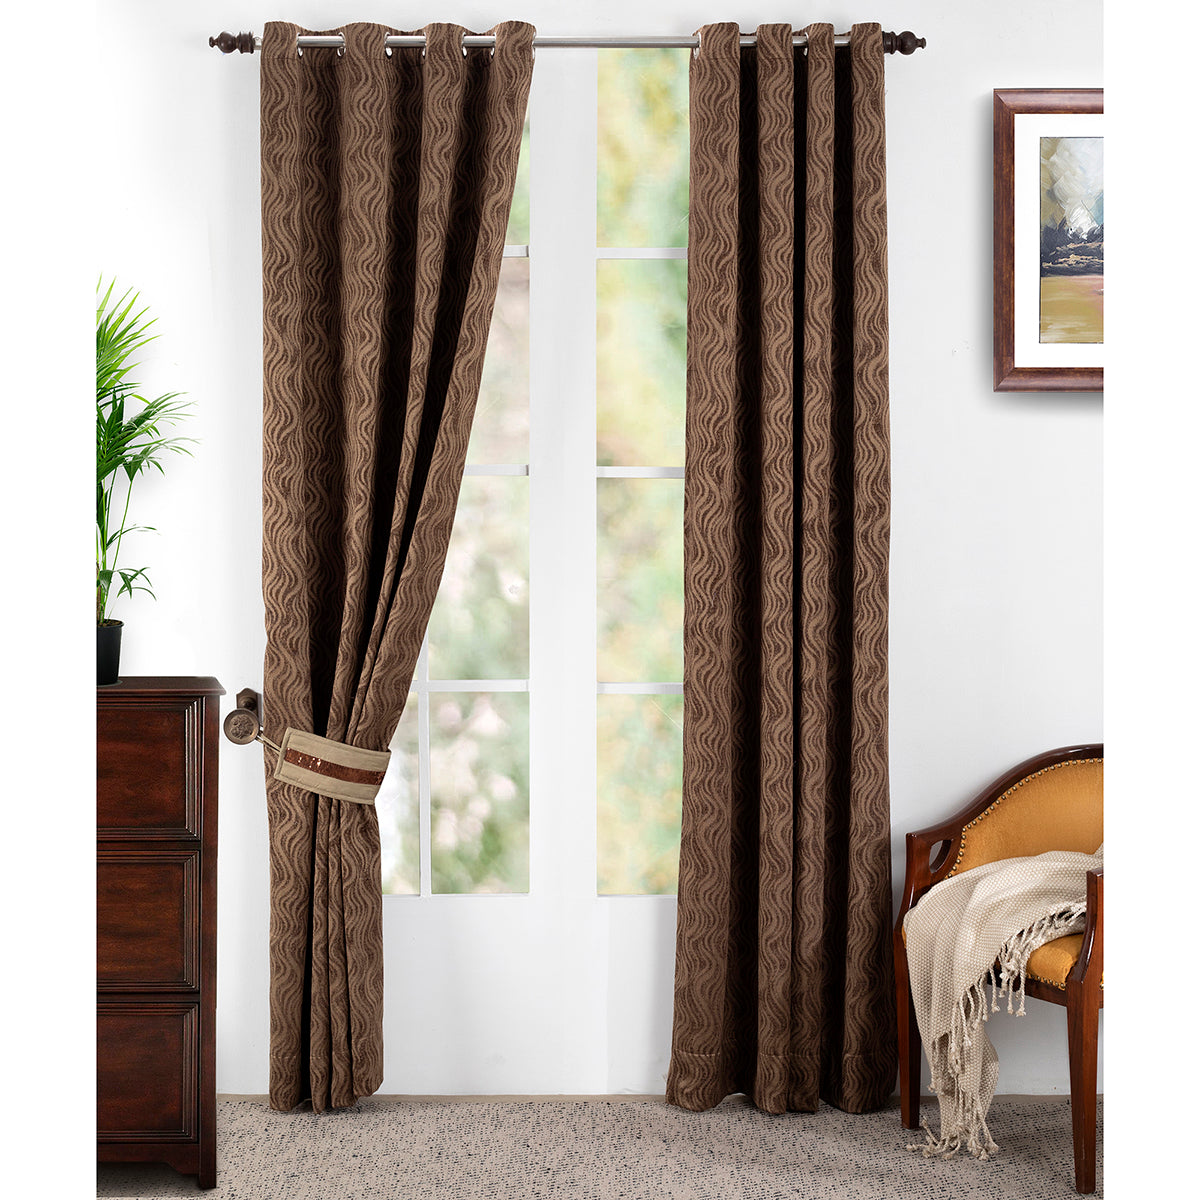 Oracle Chenille Textured 2PC Gold Curtain Set